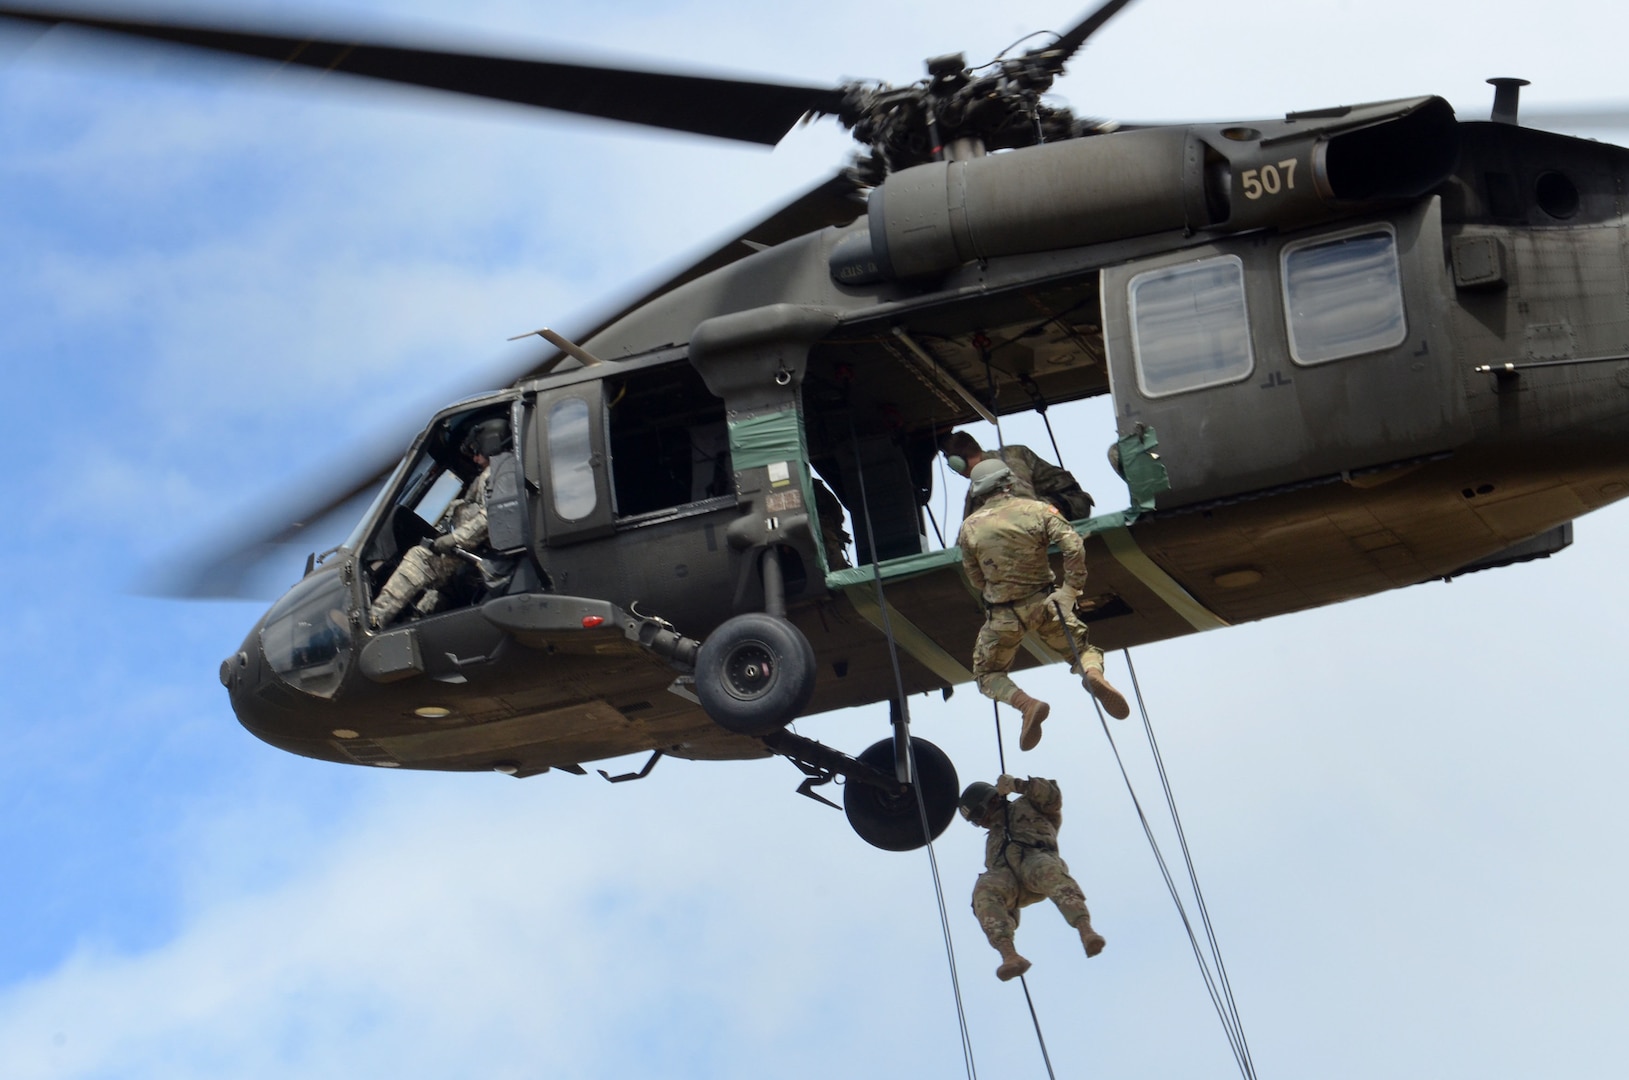 Army Soldiers take part in the rappelling portion of Air Assault School at Camp Rilea, Warrenton, Oregon, June 27, 2019.